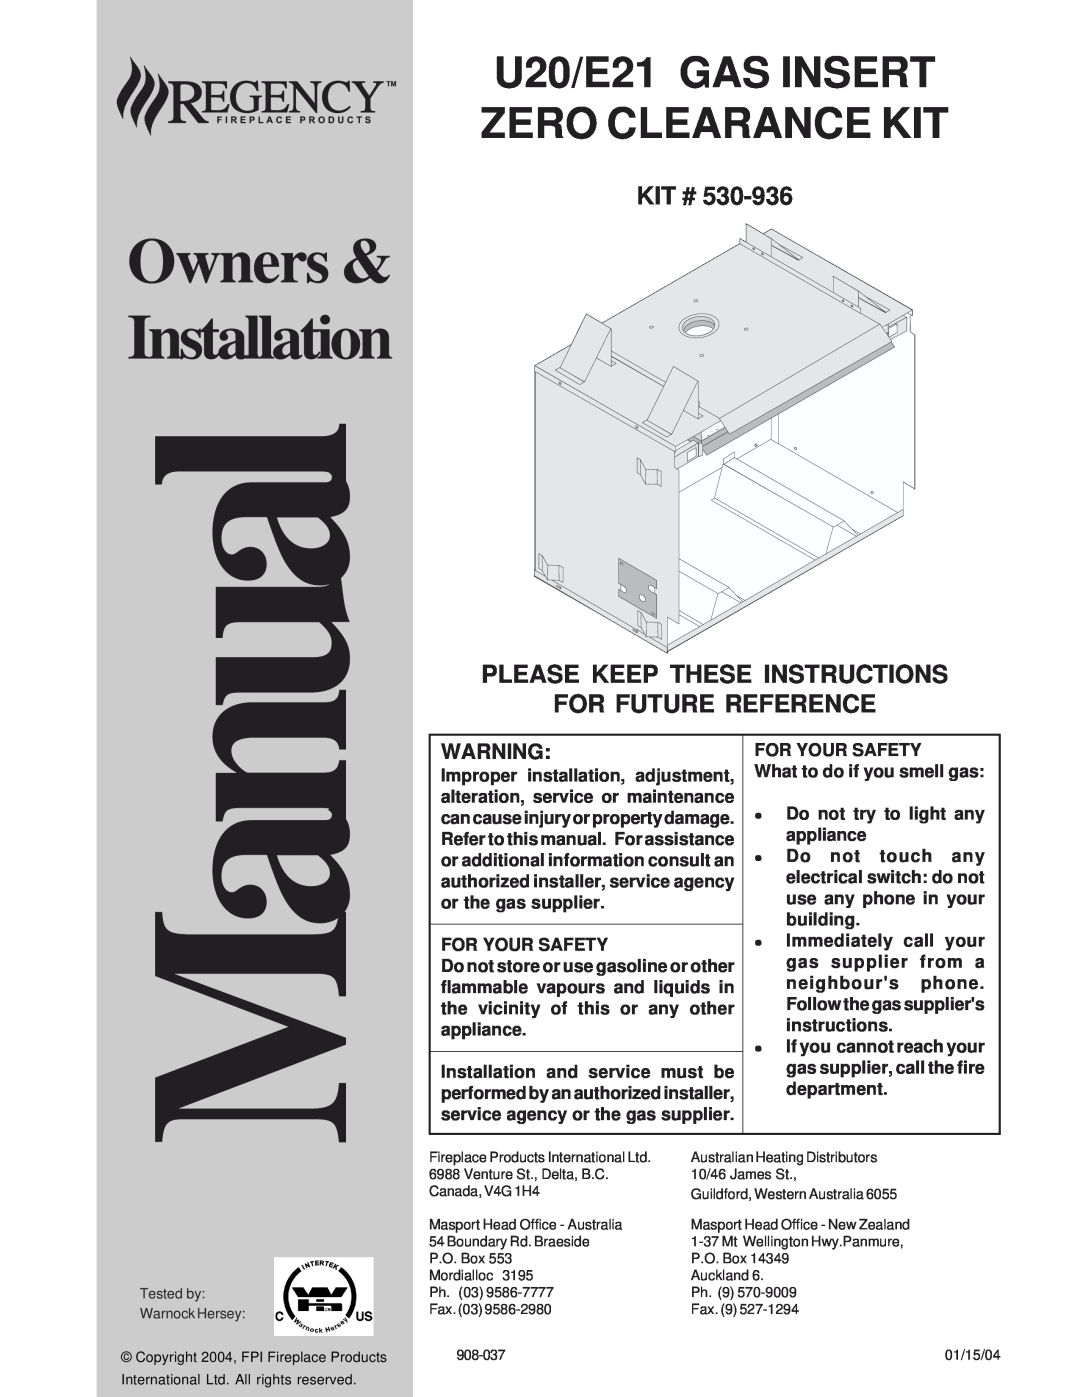 Regency E21 installation manual Kit #, Please Keep These Instructions, For Future Reference, Manual, Owners & Installation 